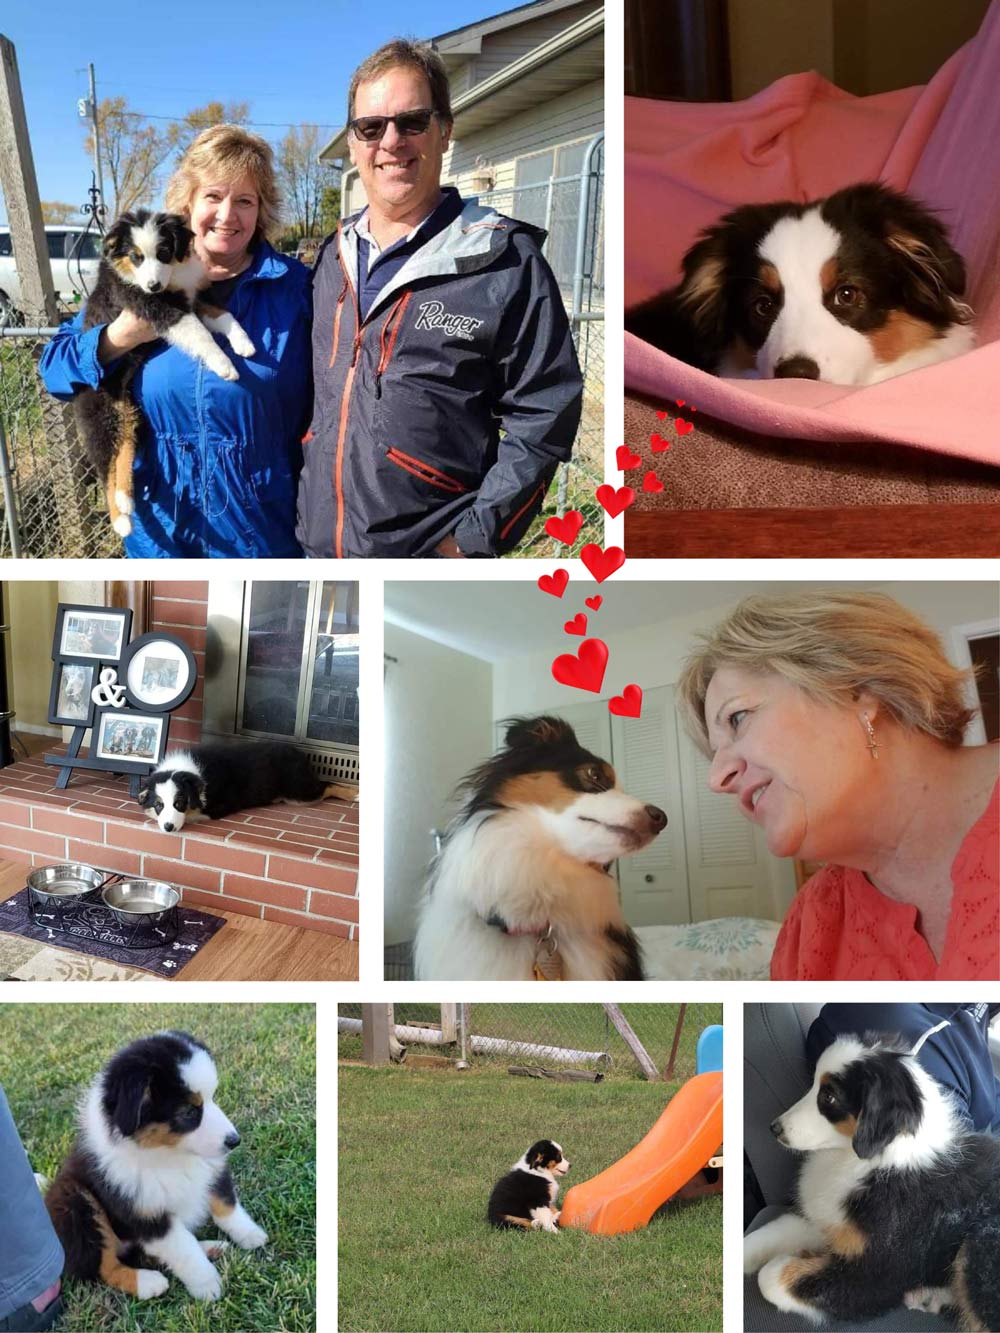 Collage of photos of Deb Coch, her dog Caylee, and boyfriend.